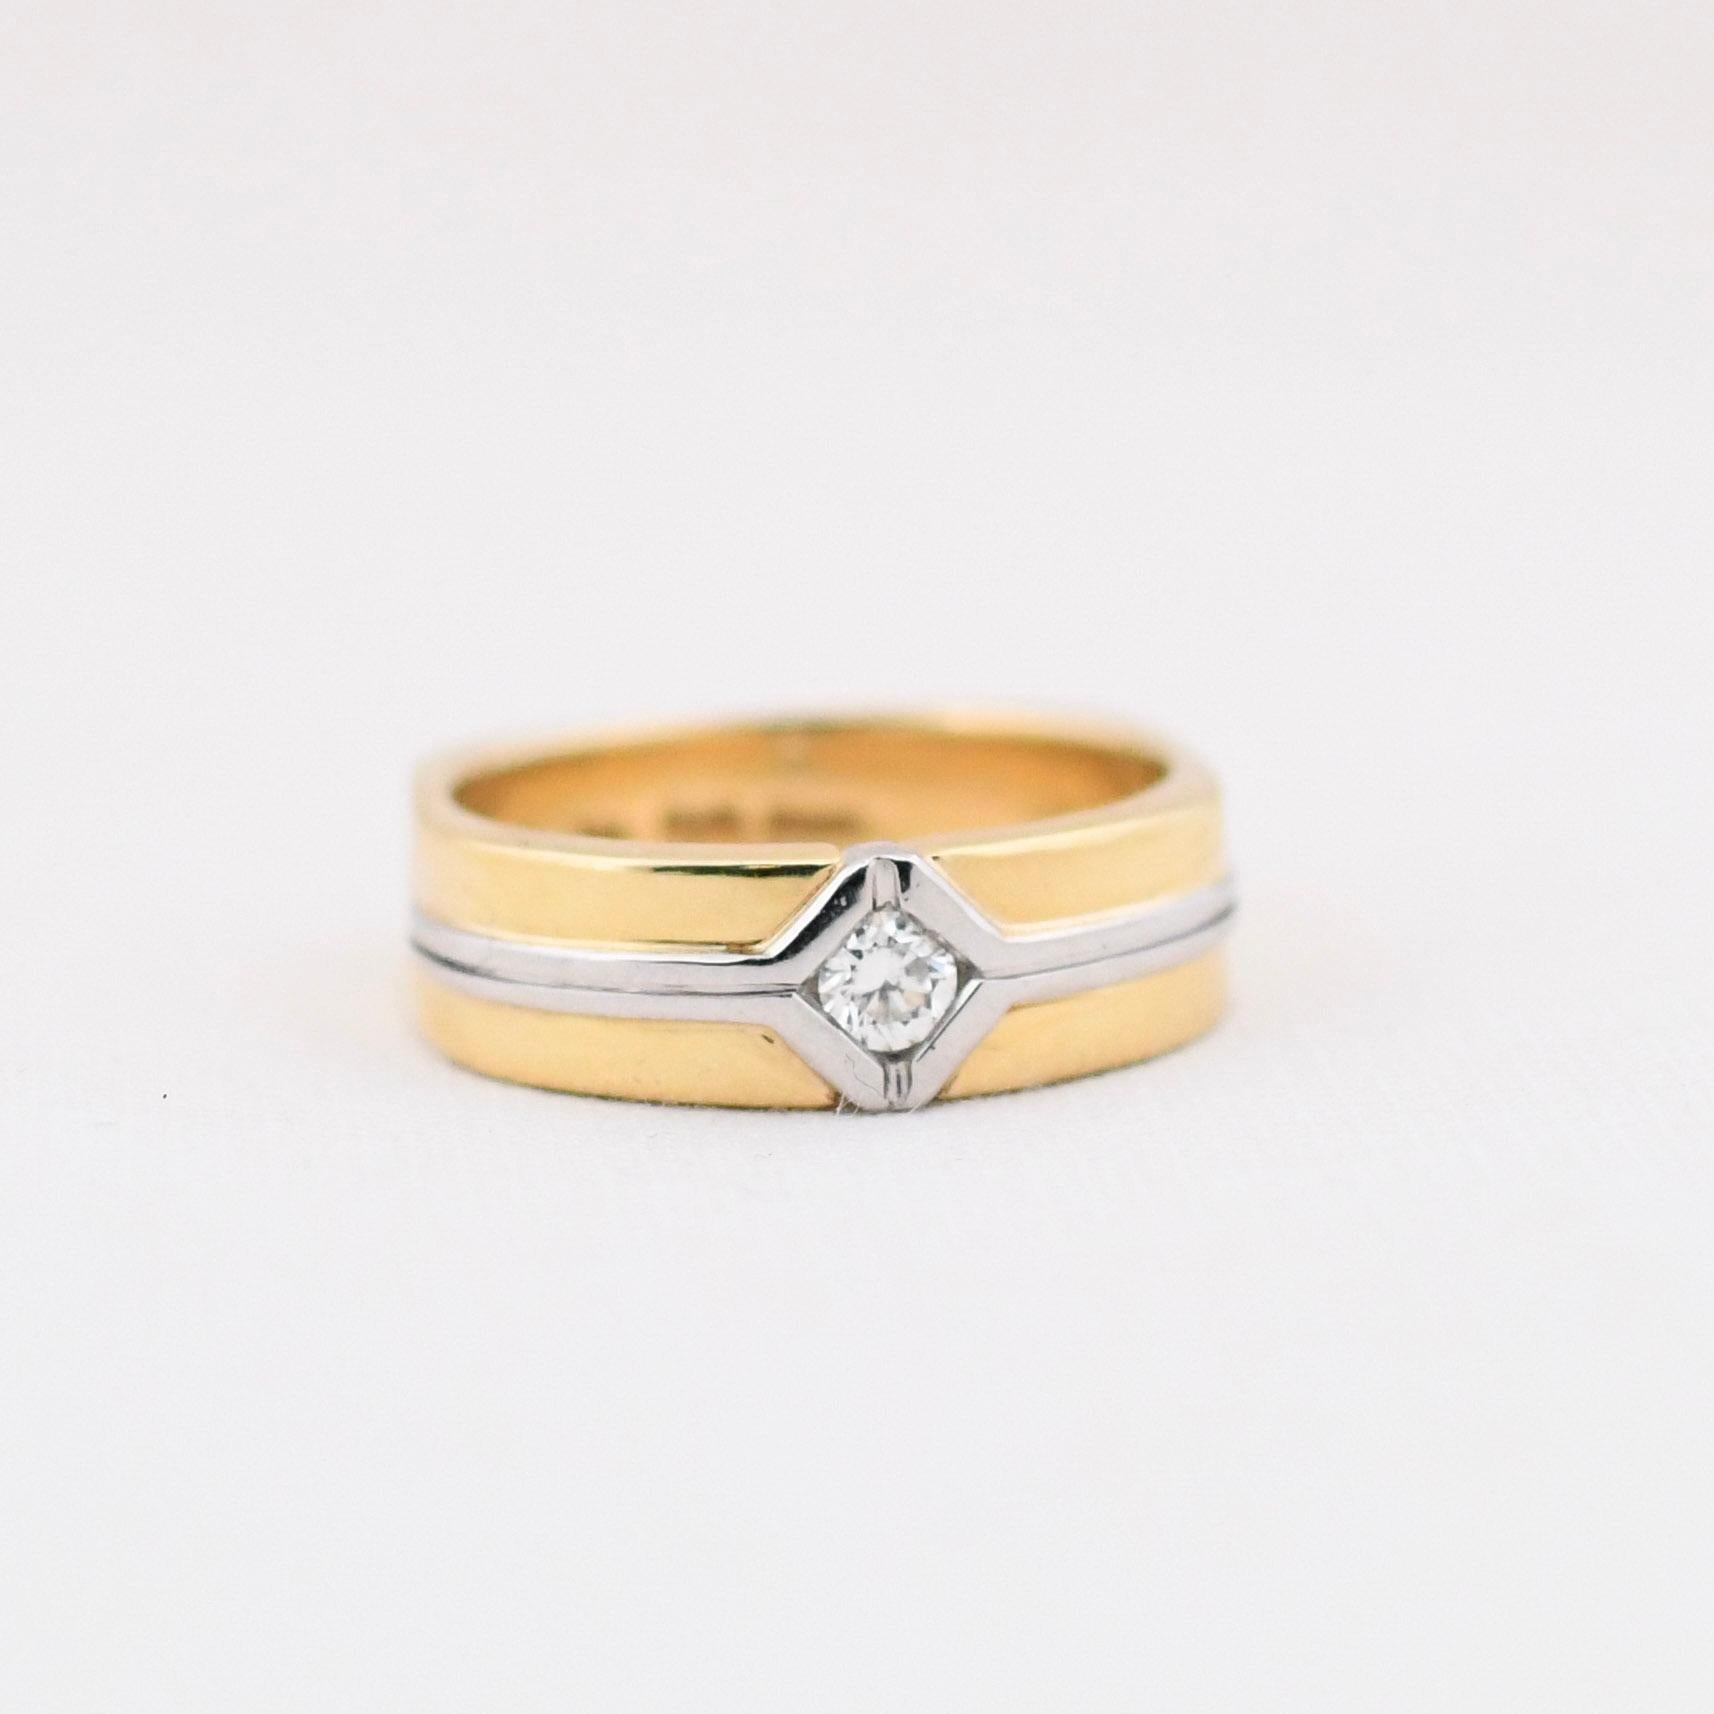 Here we have a stunning men's wedding band. With a two-tone design, the platinum and 18K yellow gold work as a team giving a timeless geometric design. Predominantly yellow gold there is a platinum inlay splitting the gold and surrounding the